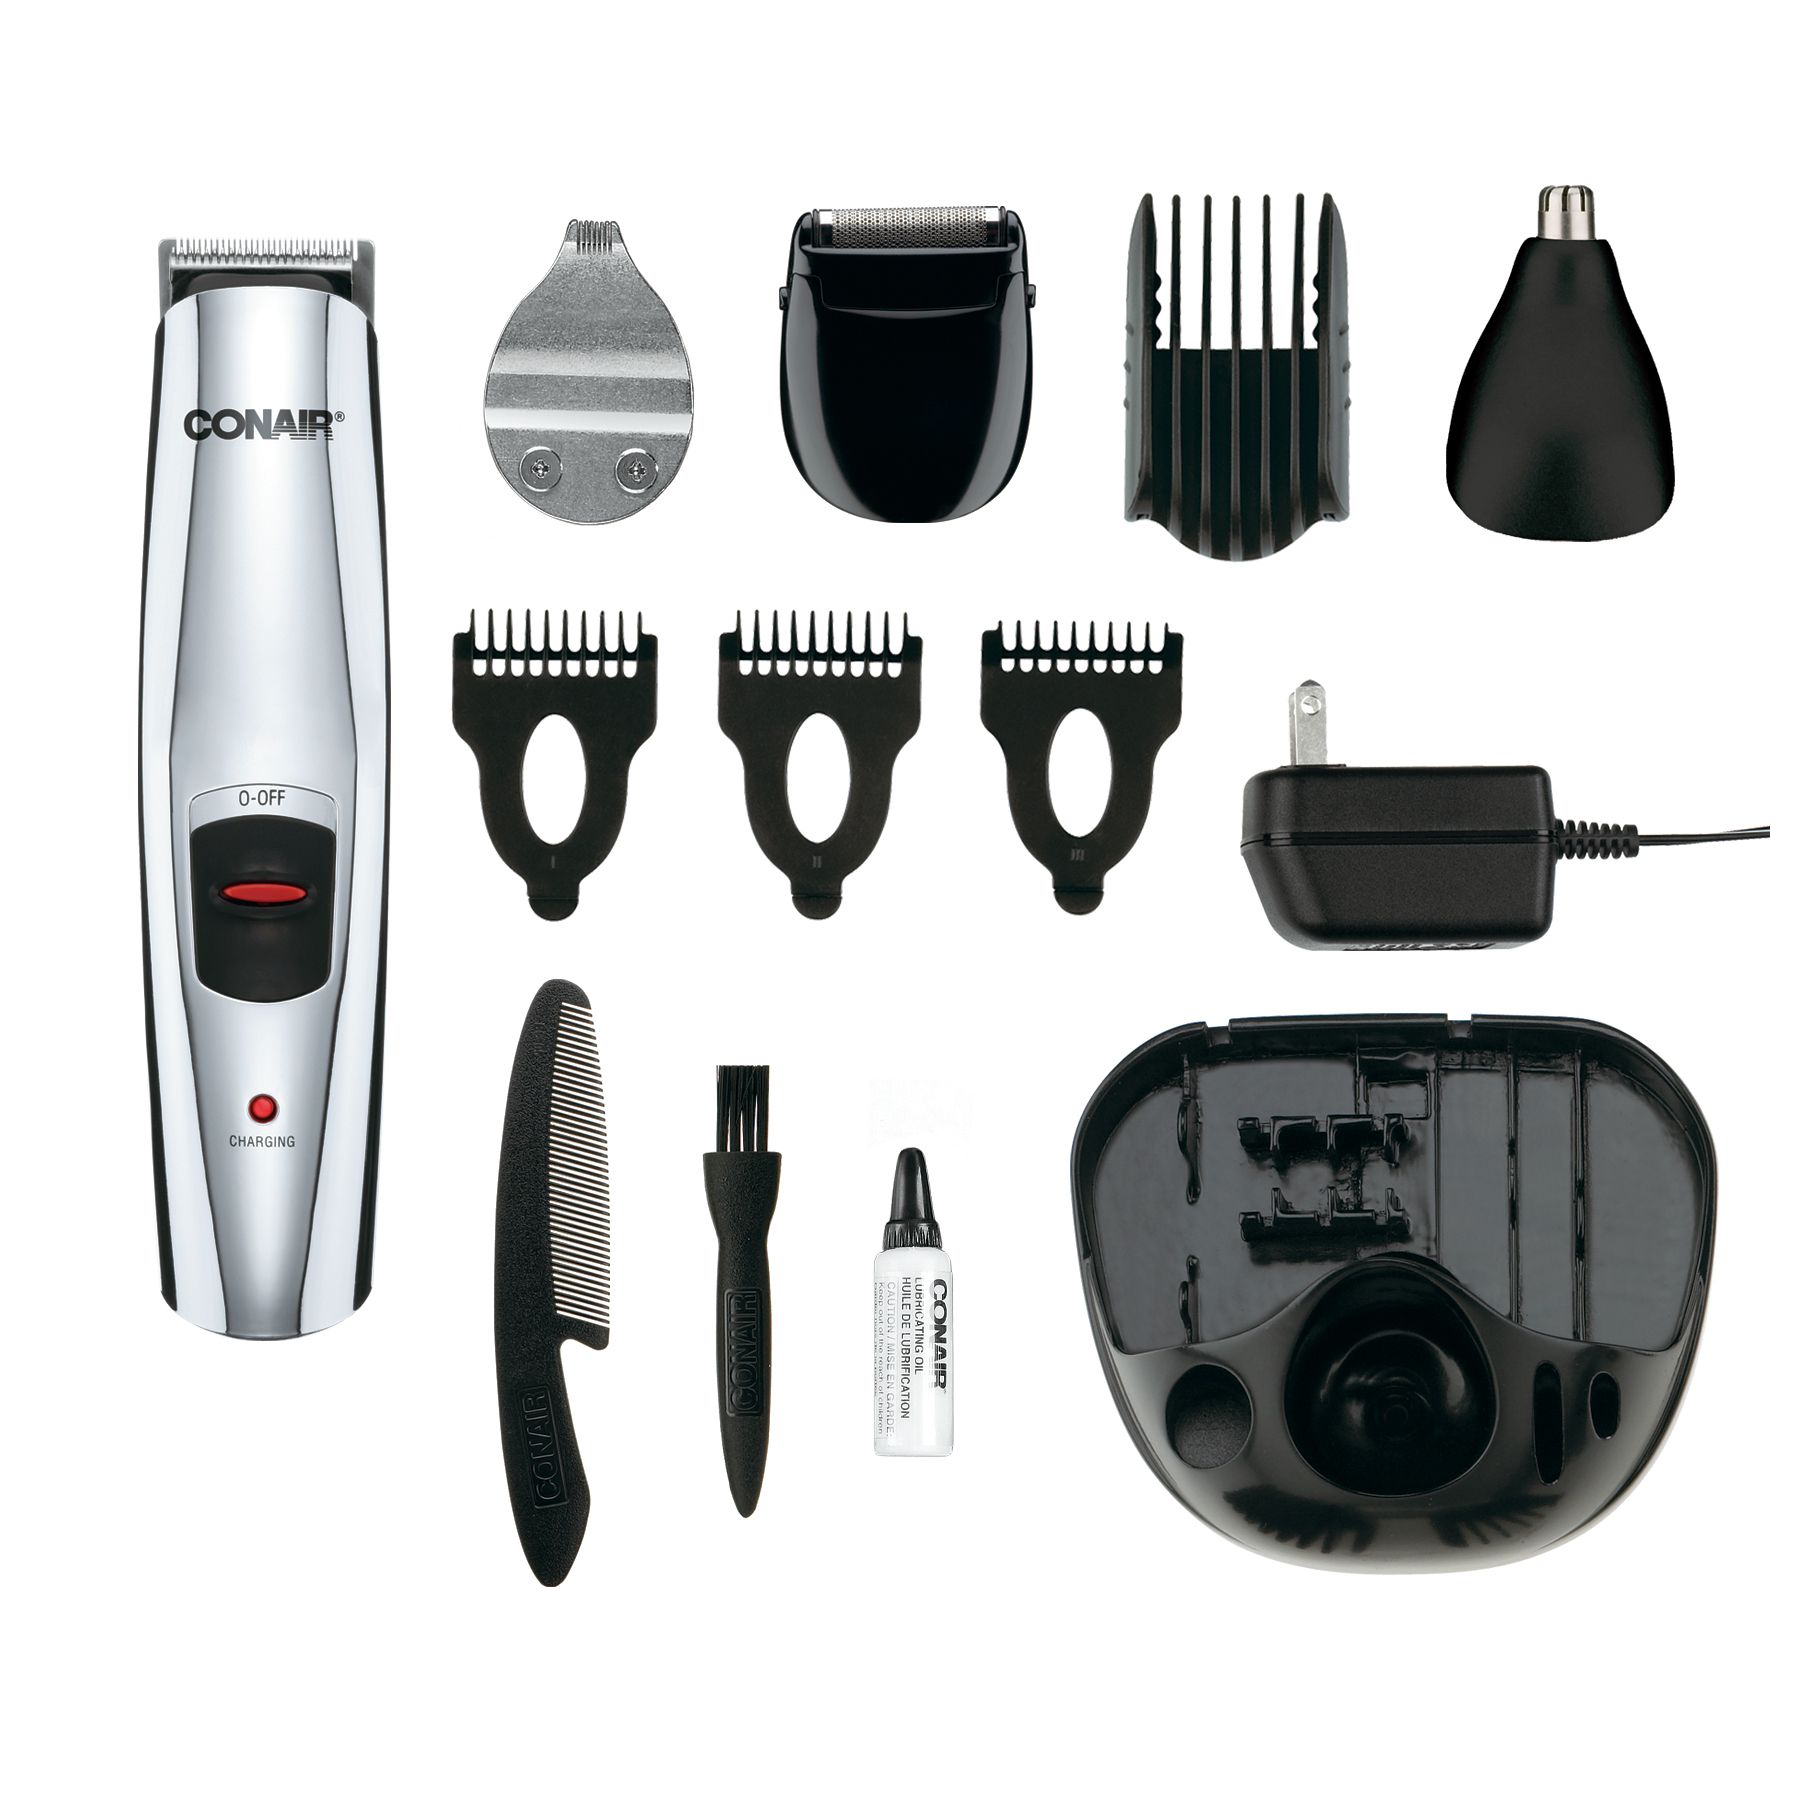 Conair Rechargeable Beard/Mustache Professional Multi-Use Trimmer Kit